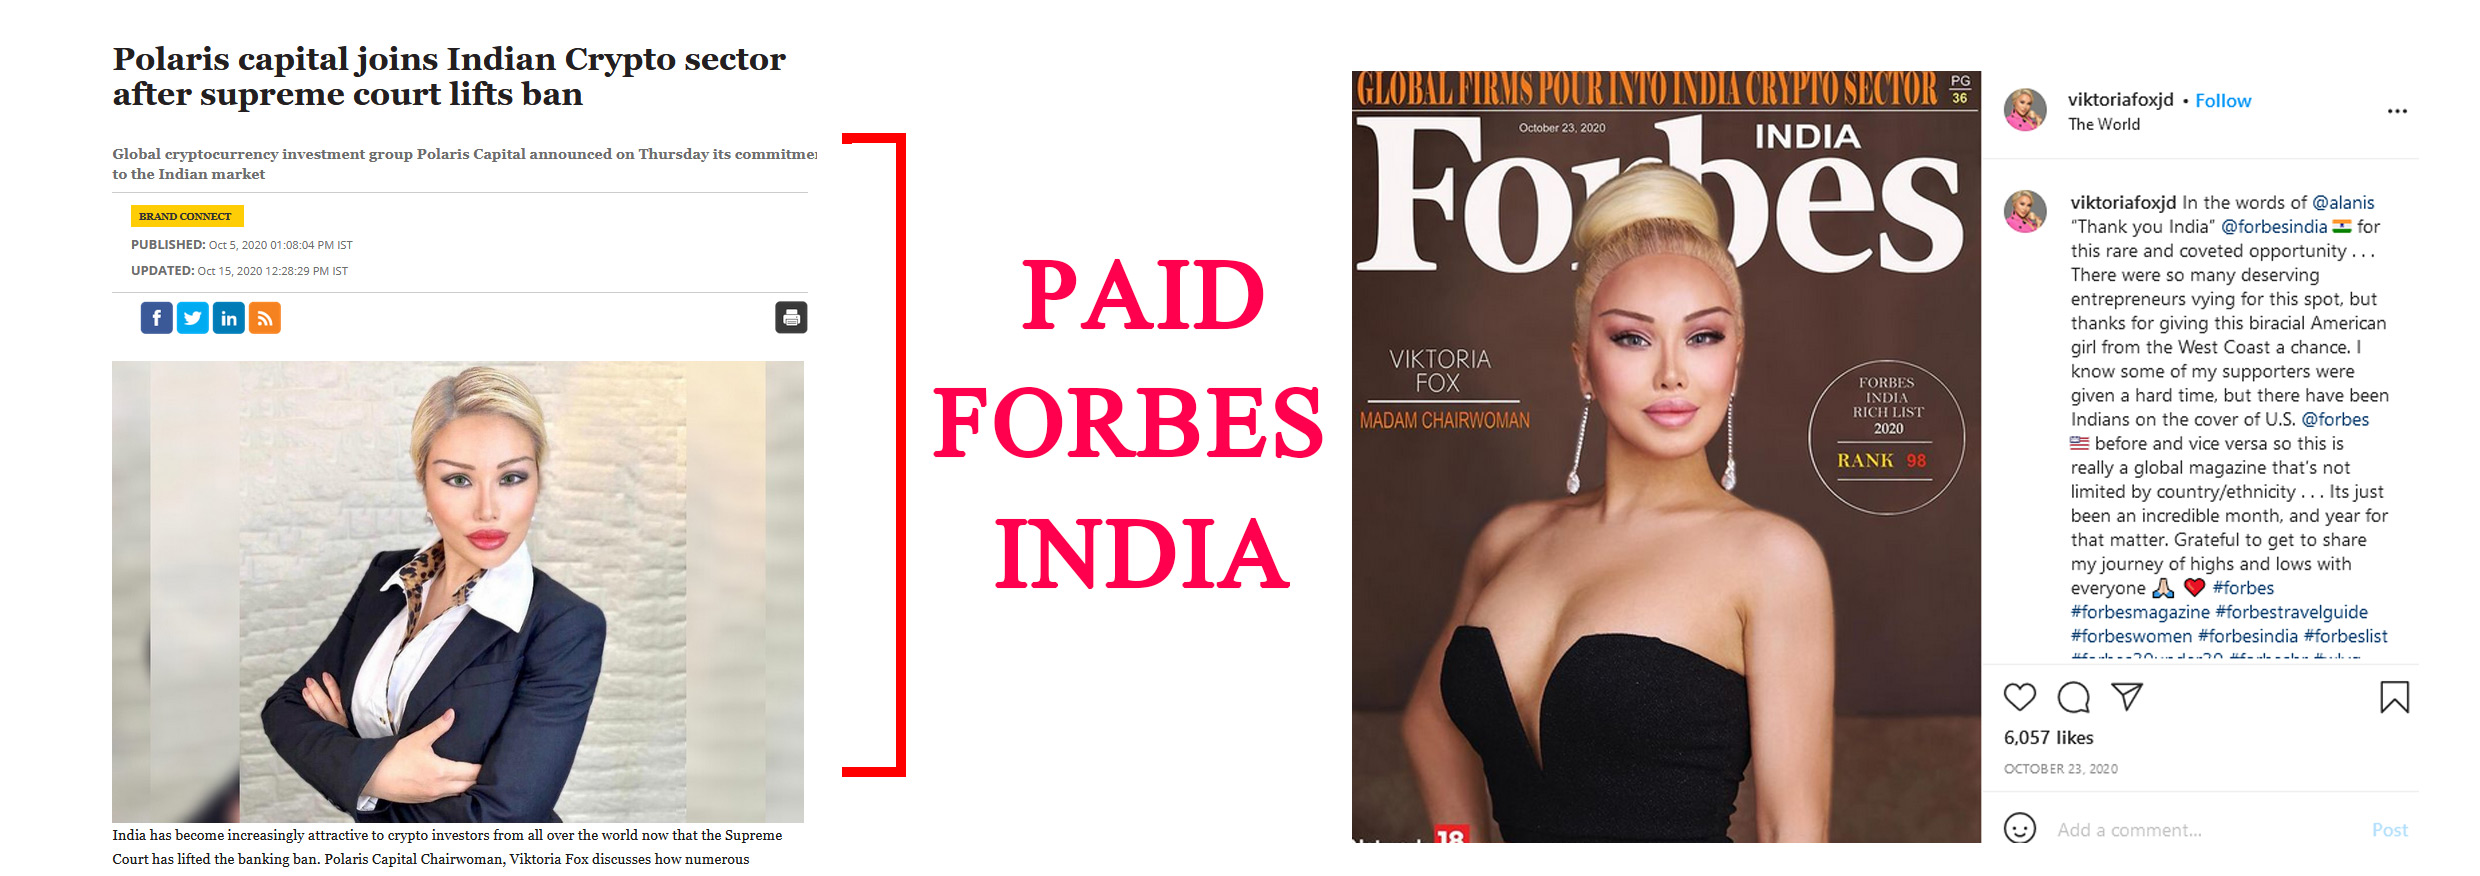 Forbes-India